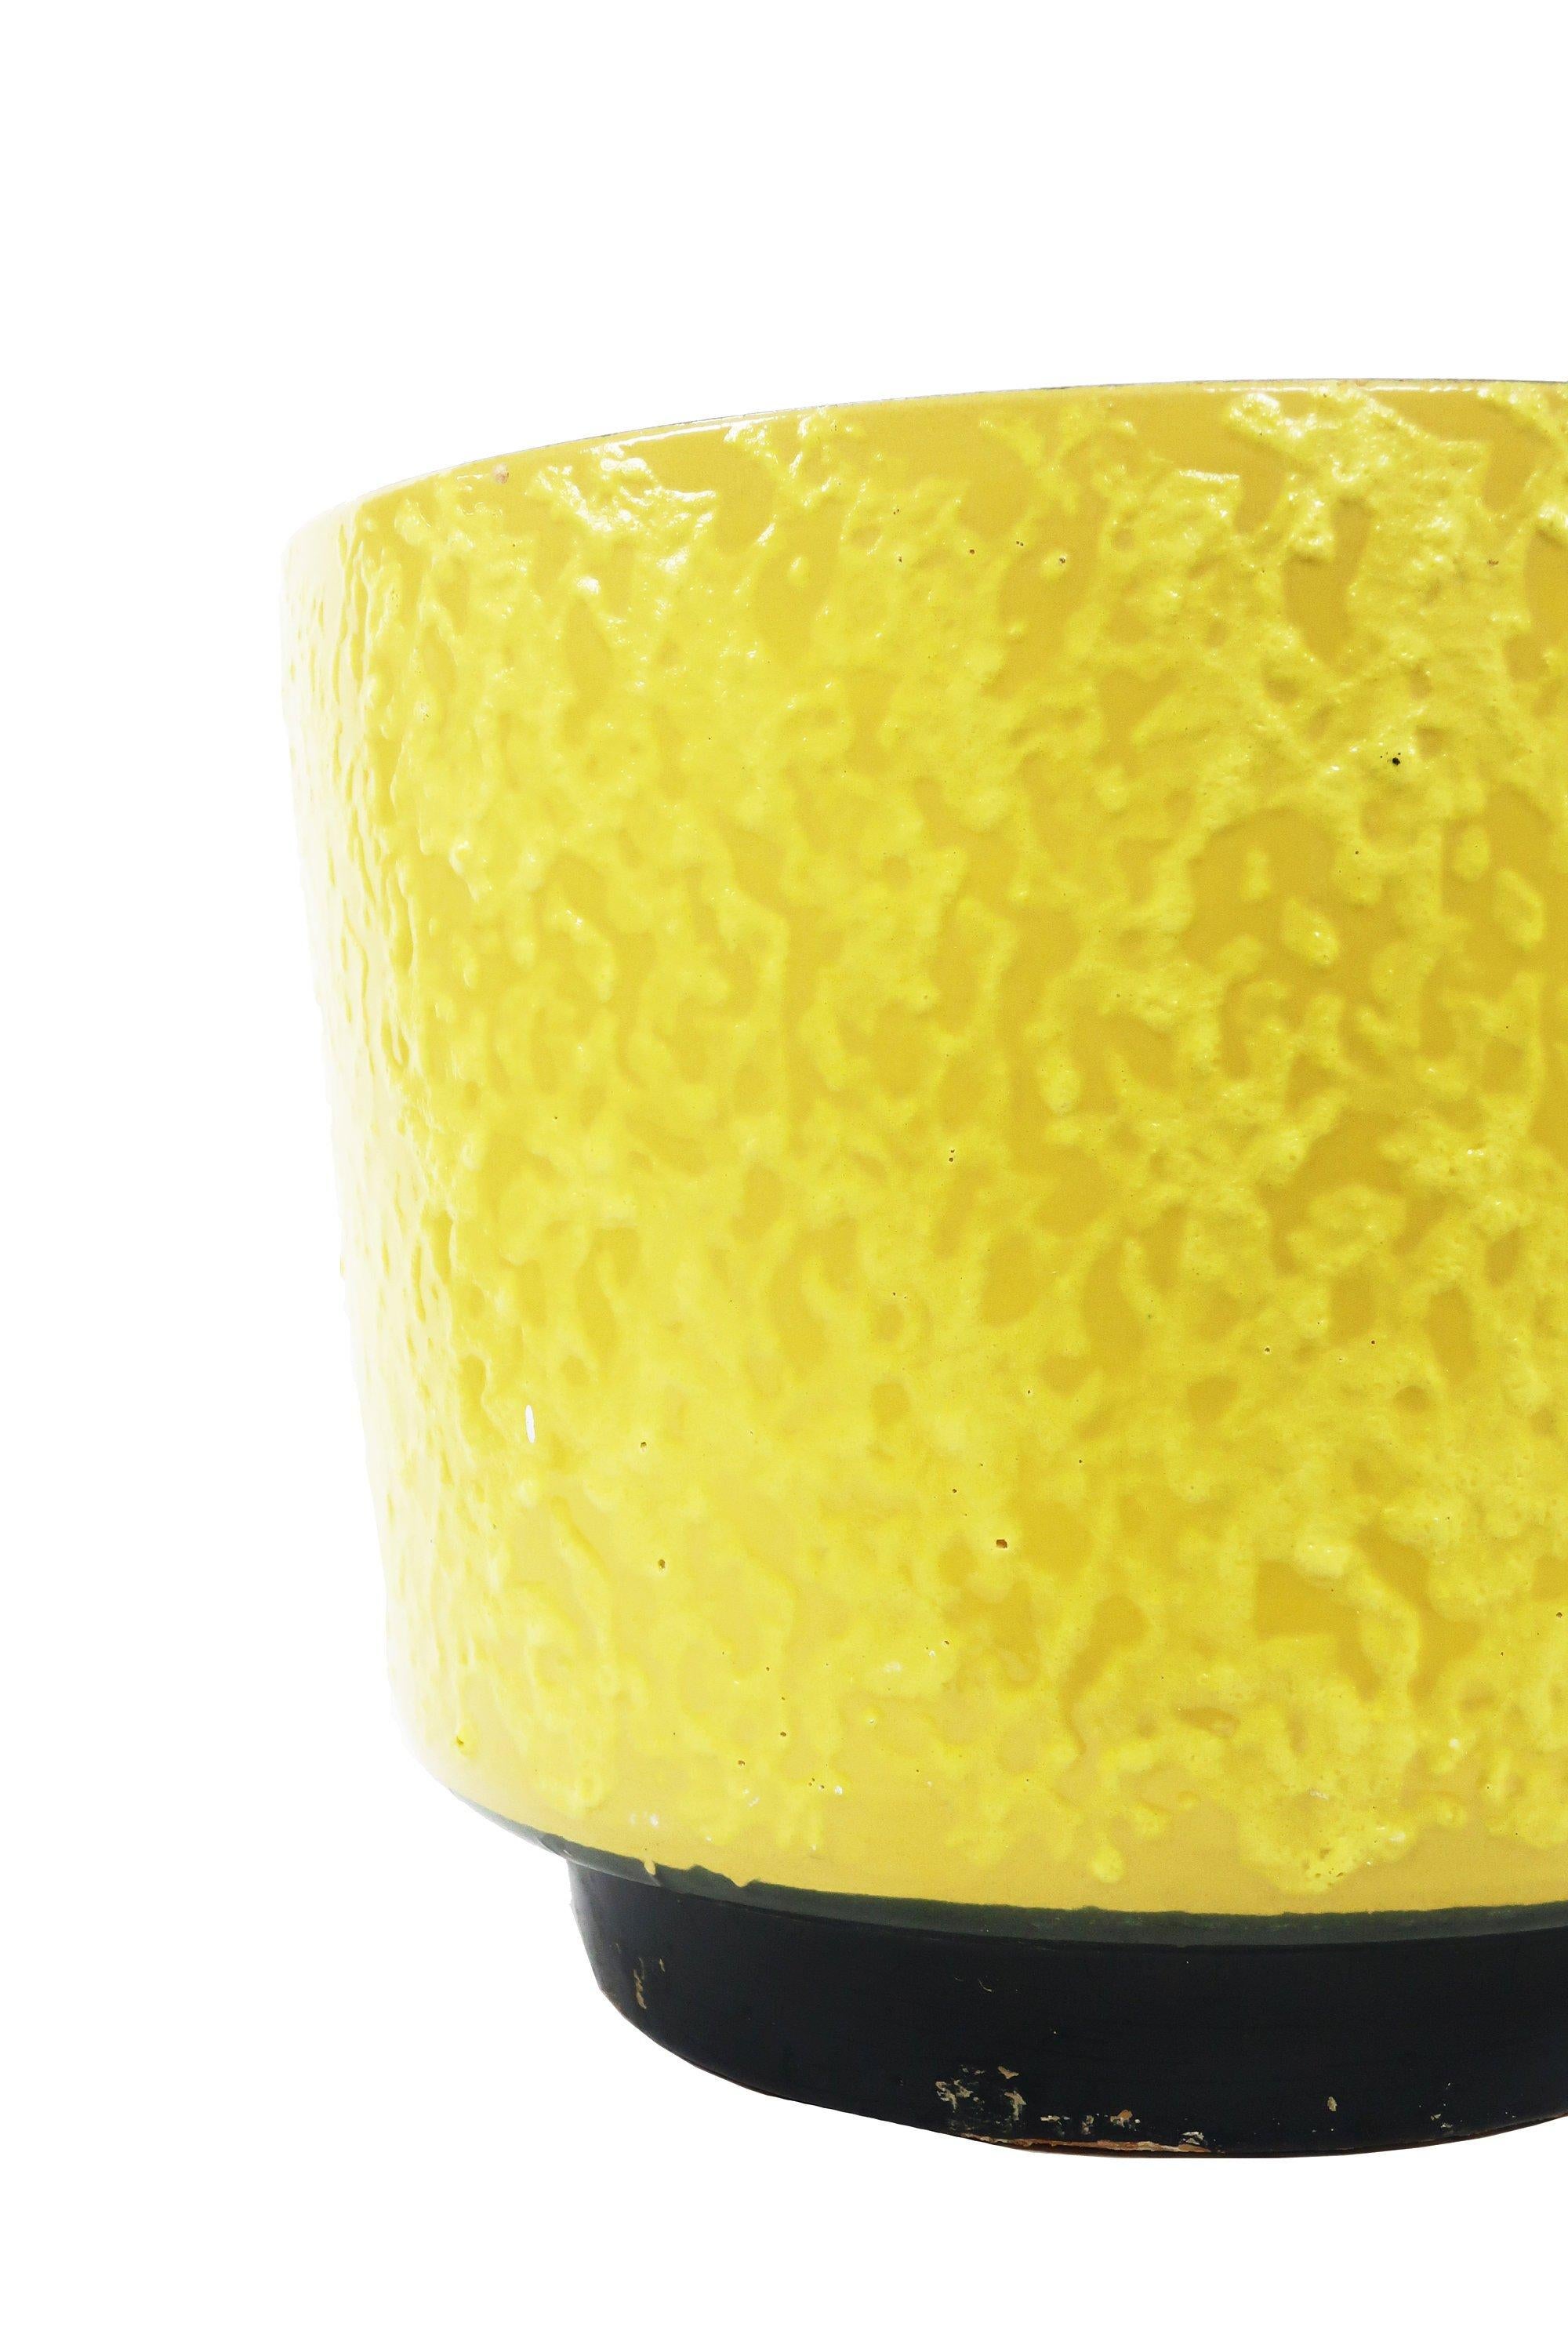 An extra large cylindrical Mid-Century Modern ceramic planter in the “Fat Lava” (a very tactile textured exterior) style with a bright yellow glaze that fades into a rich dark brown/black at the base

In excellent vintage condition.

Measures: